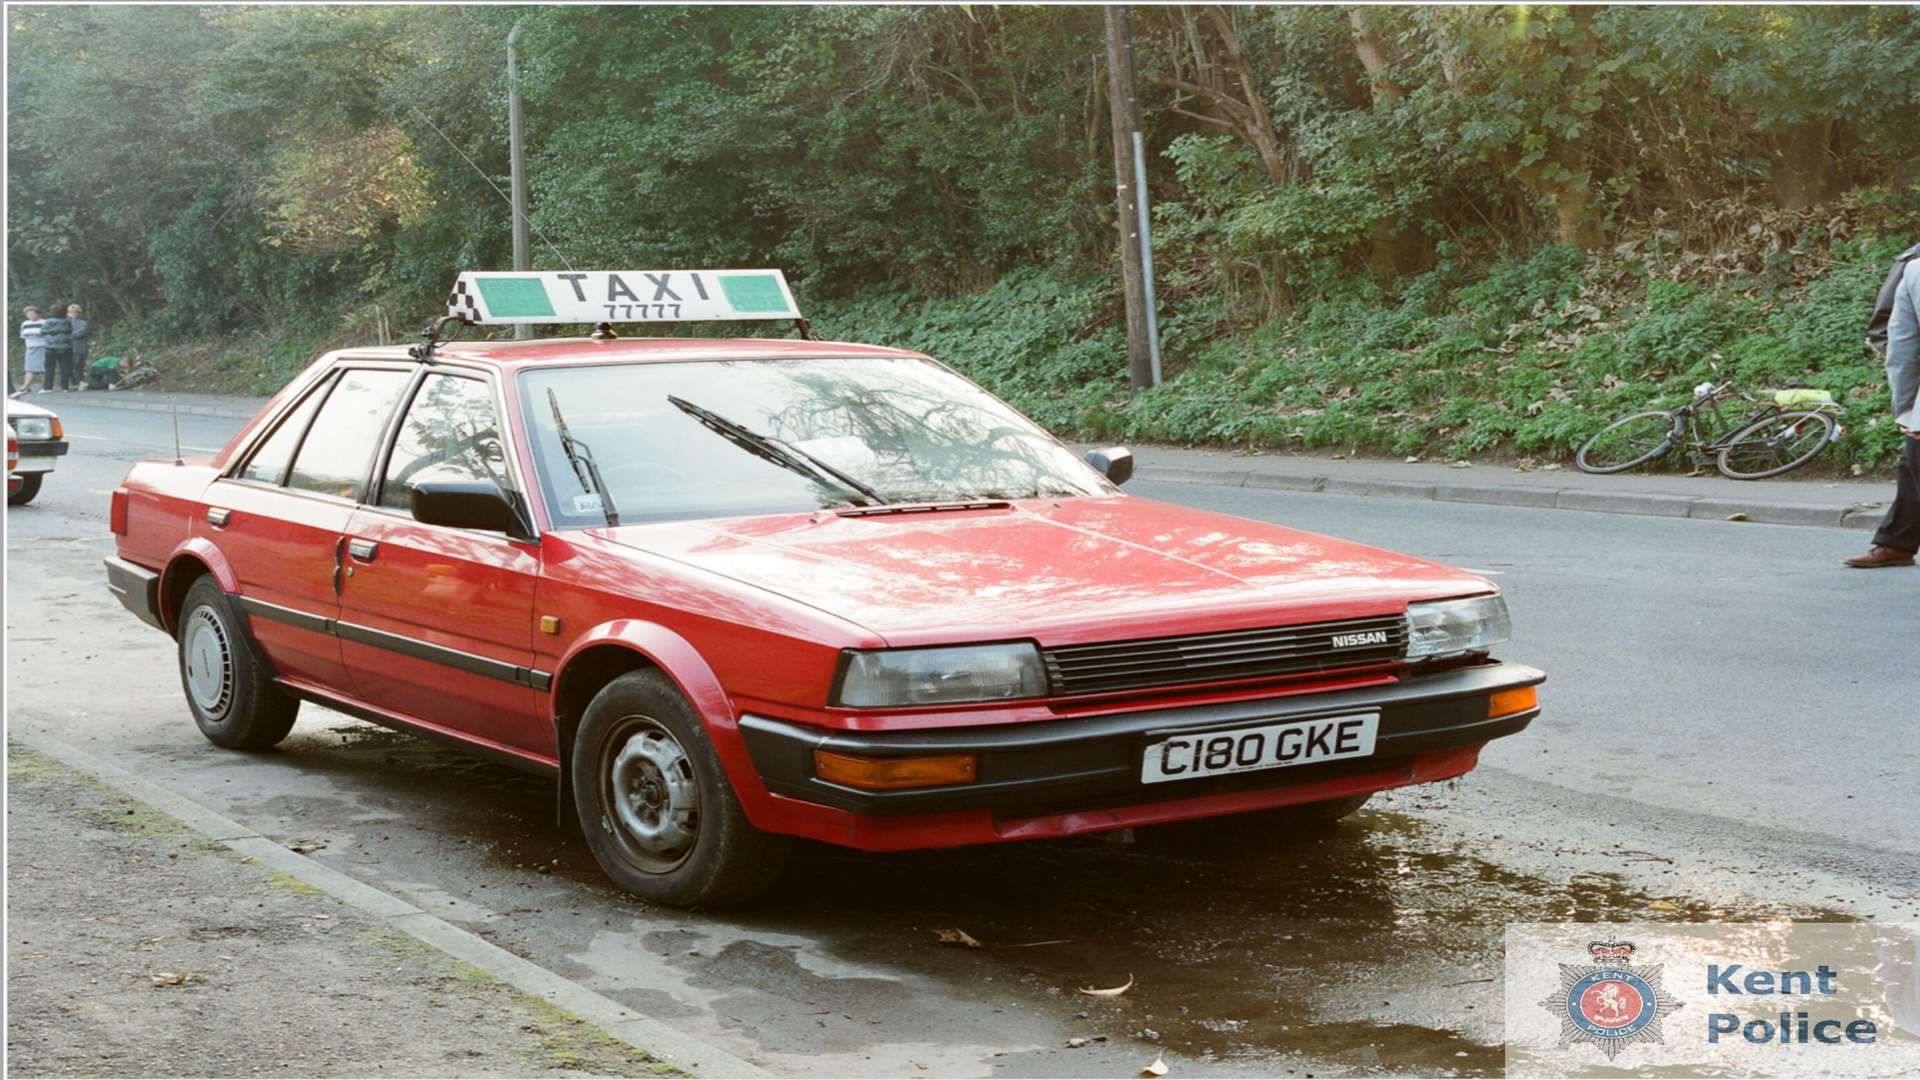 The Nissan Bluebird taxi was found in a layby Seabrook, near Hythe, on November 6, 1988. Picture: Kent Police